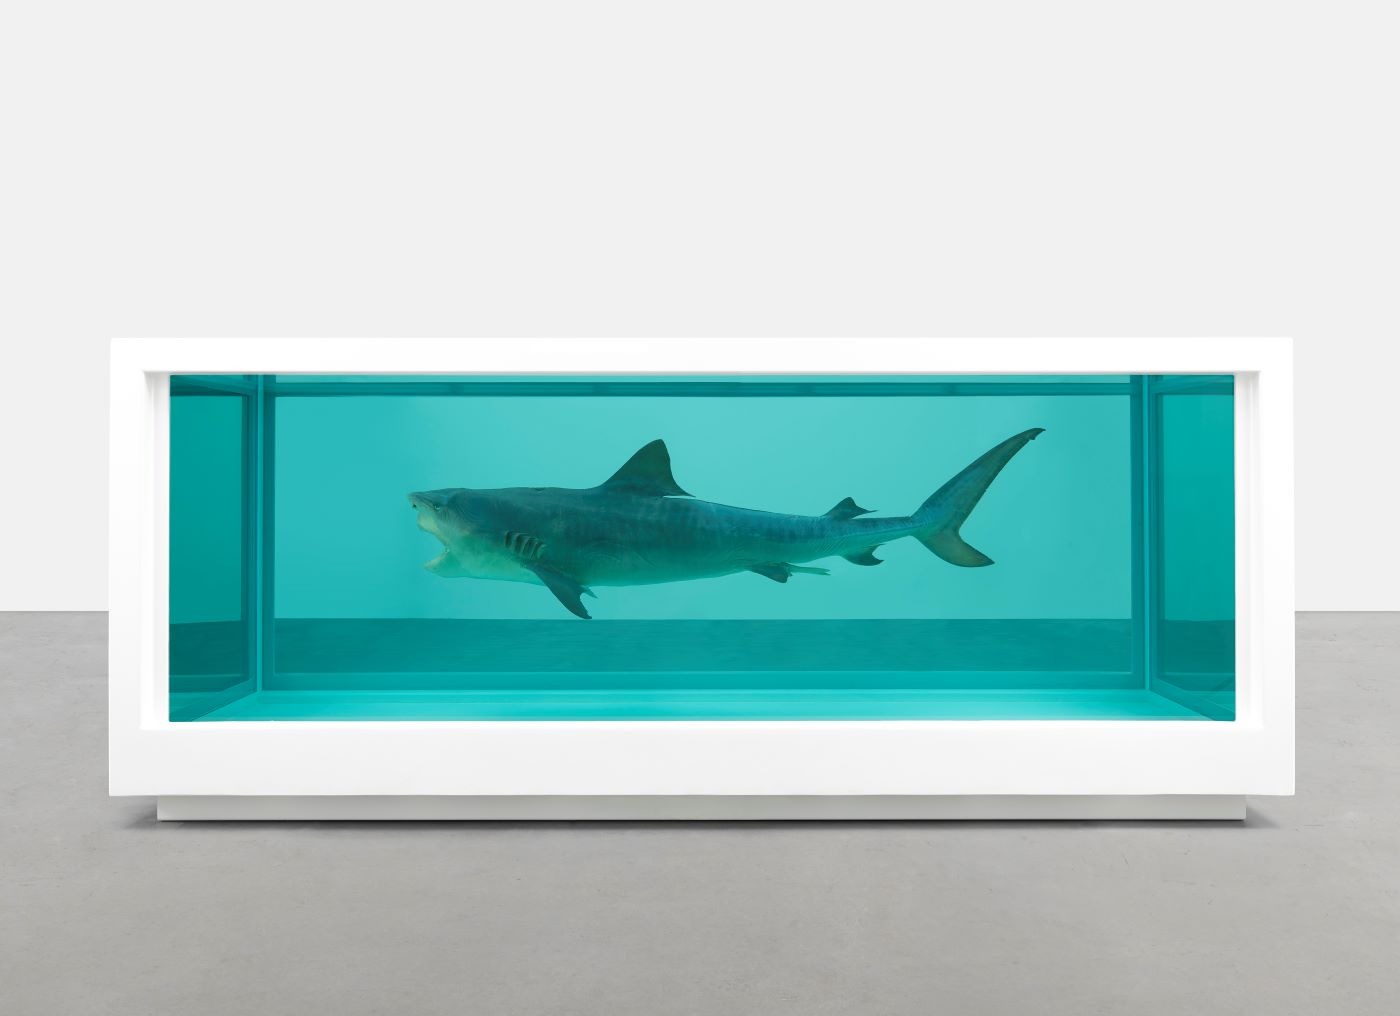 Damien Hirst: To Live Forever (For a While)